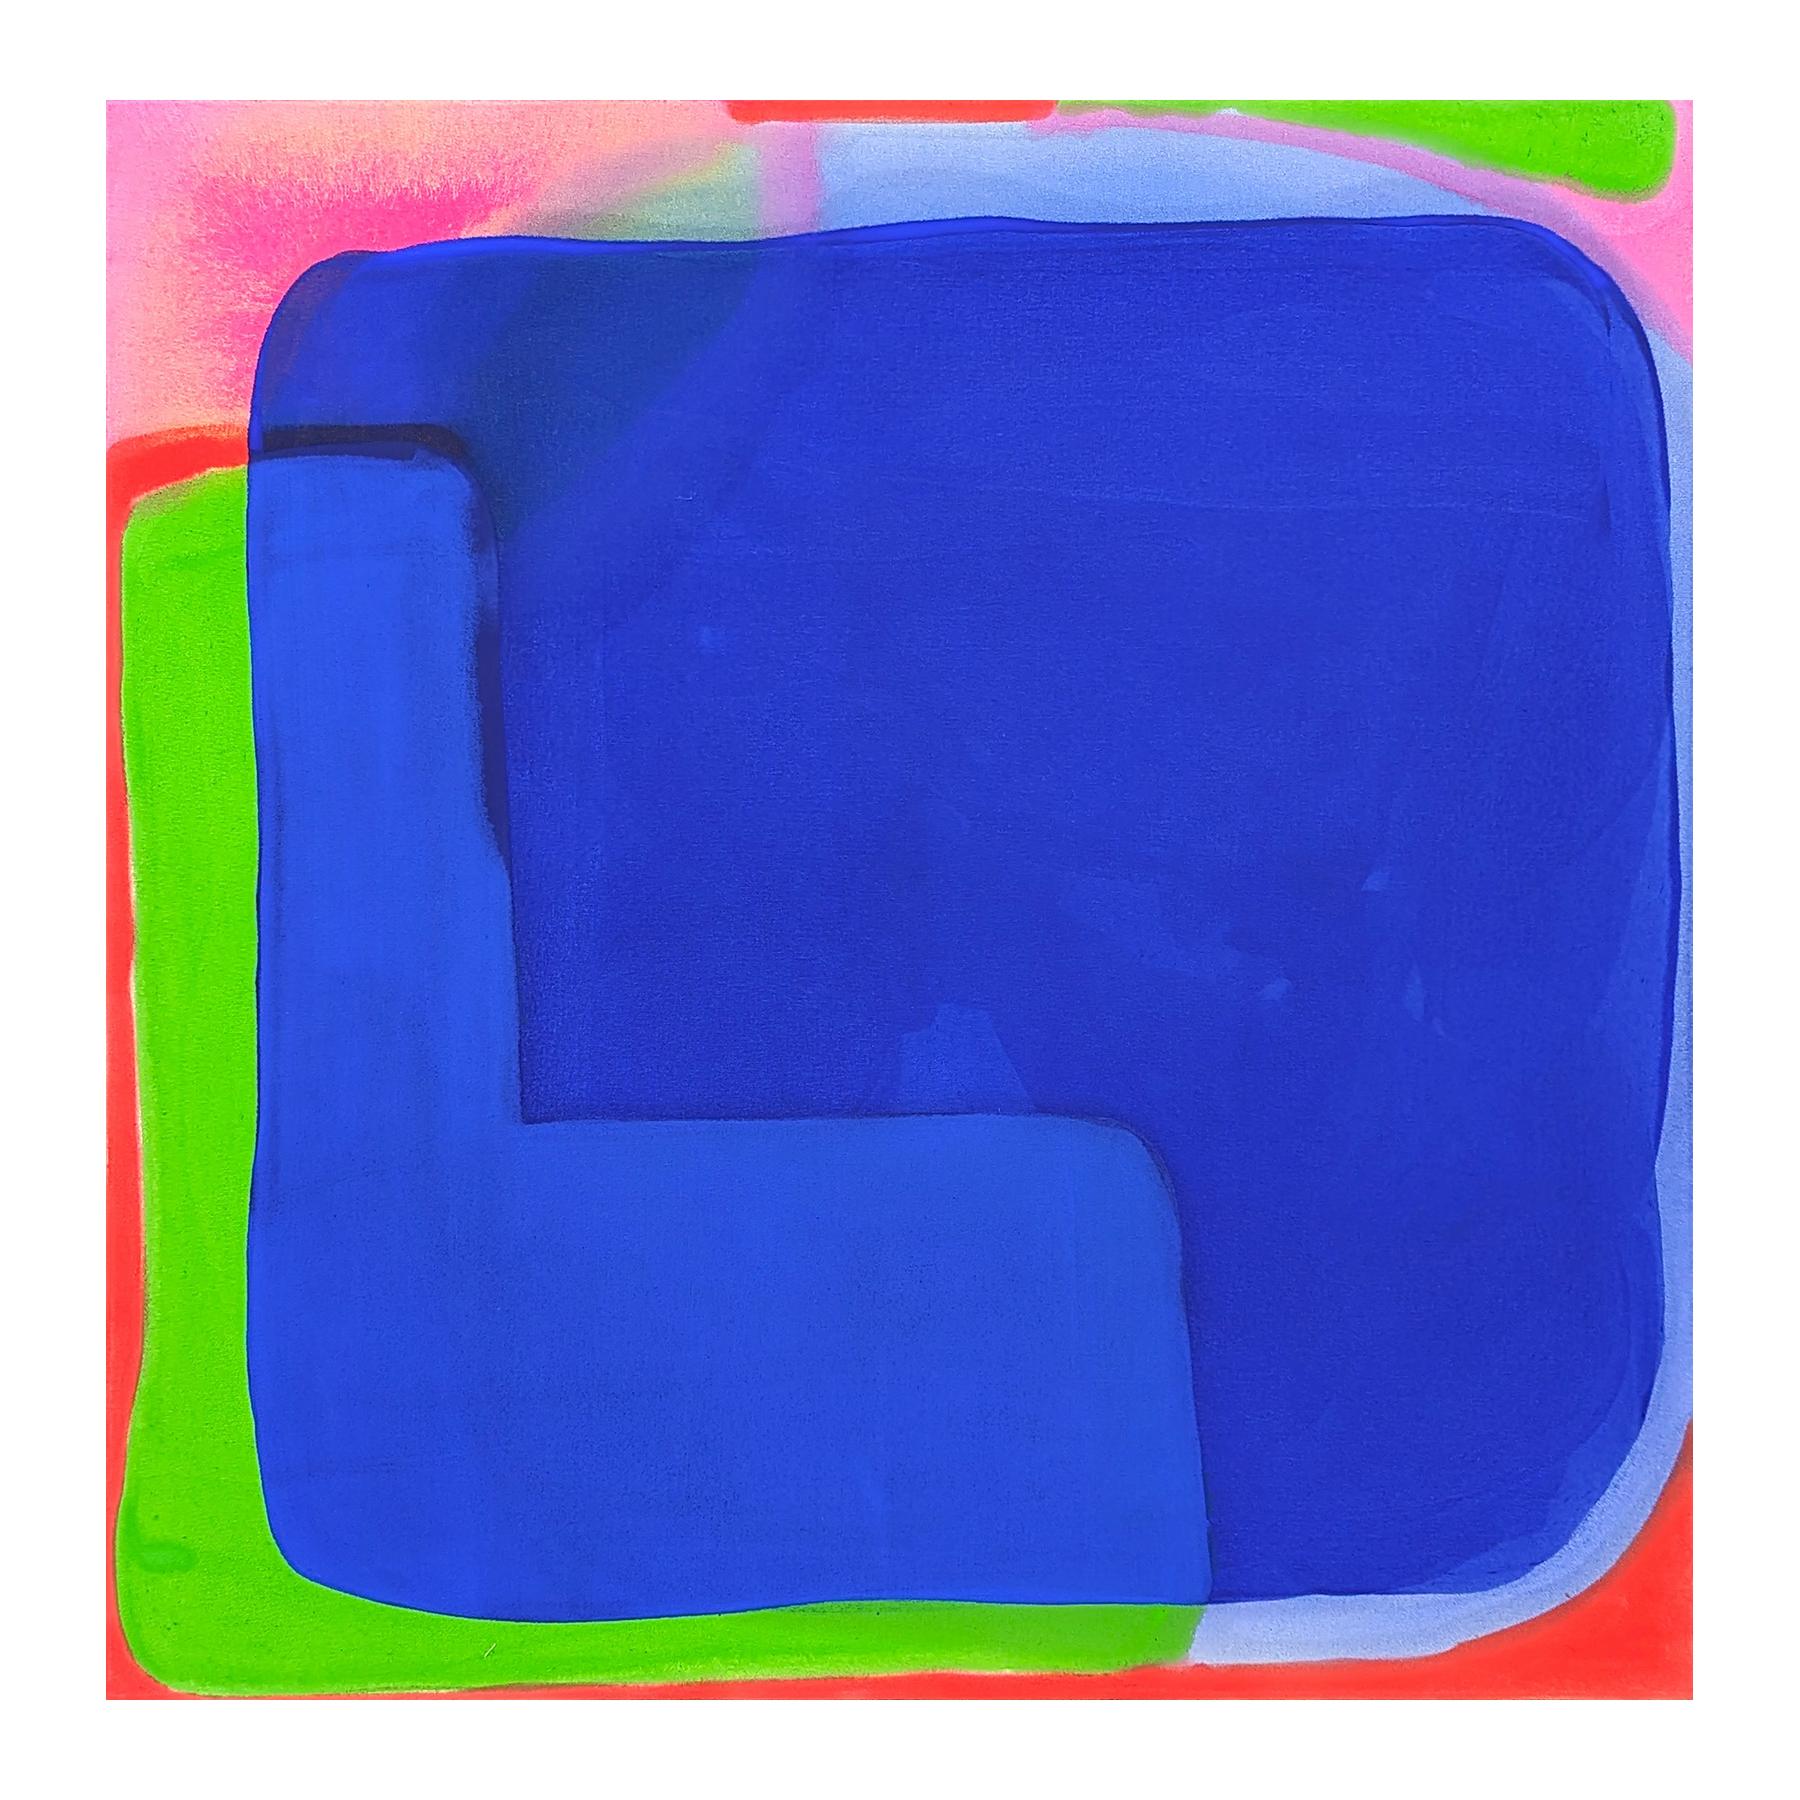 Contemporary abstract painting by Houston-based artist Gary Griffin. The work features a central amorphous shape created with diffused layers of blue, pink, green, and red paint. Signed, titled, and dated on the reverse. Currently unframed, but